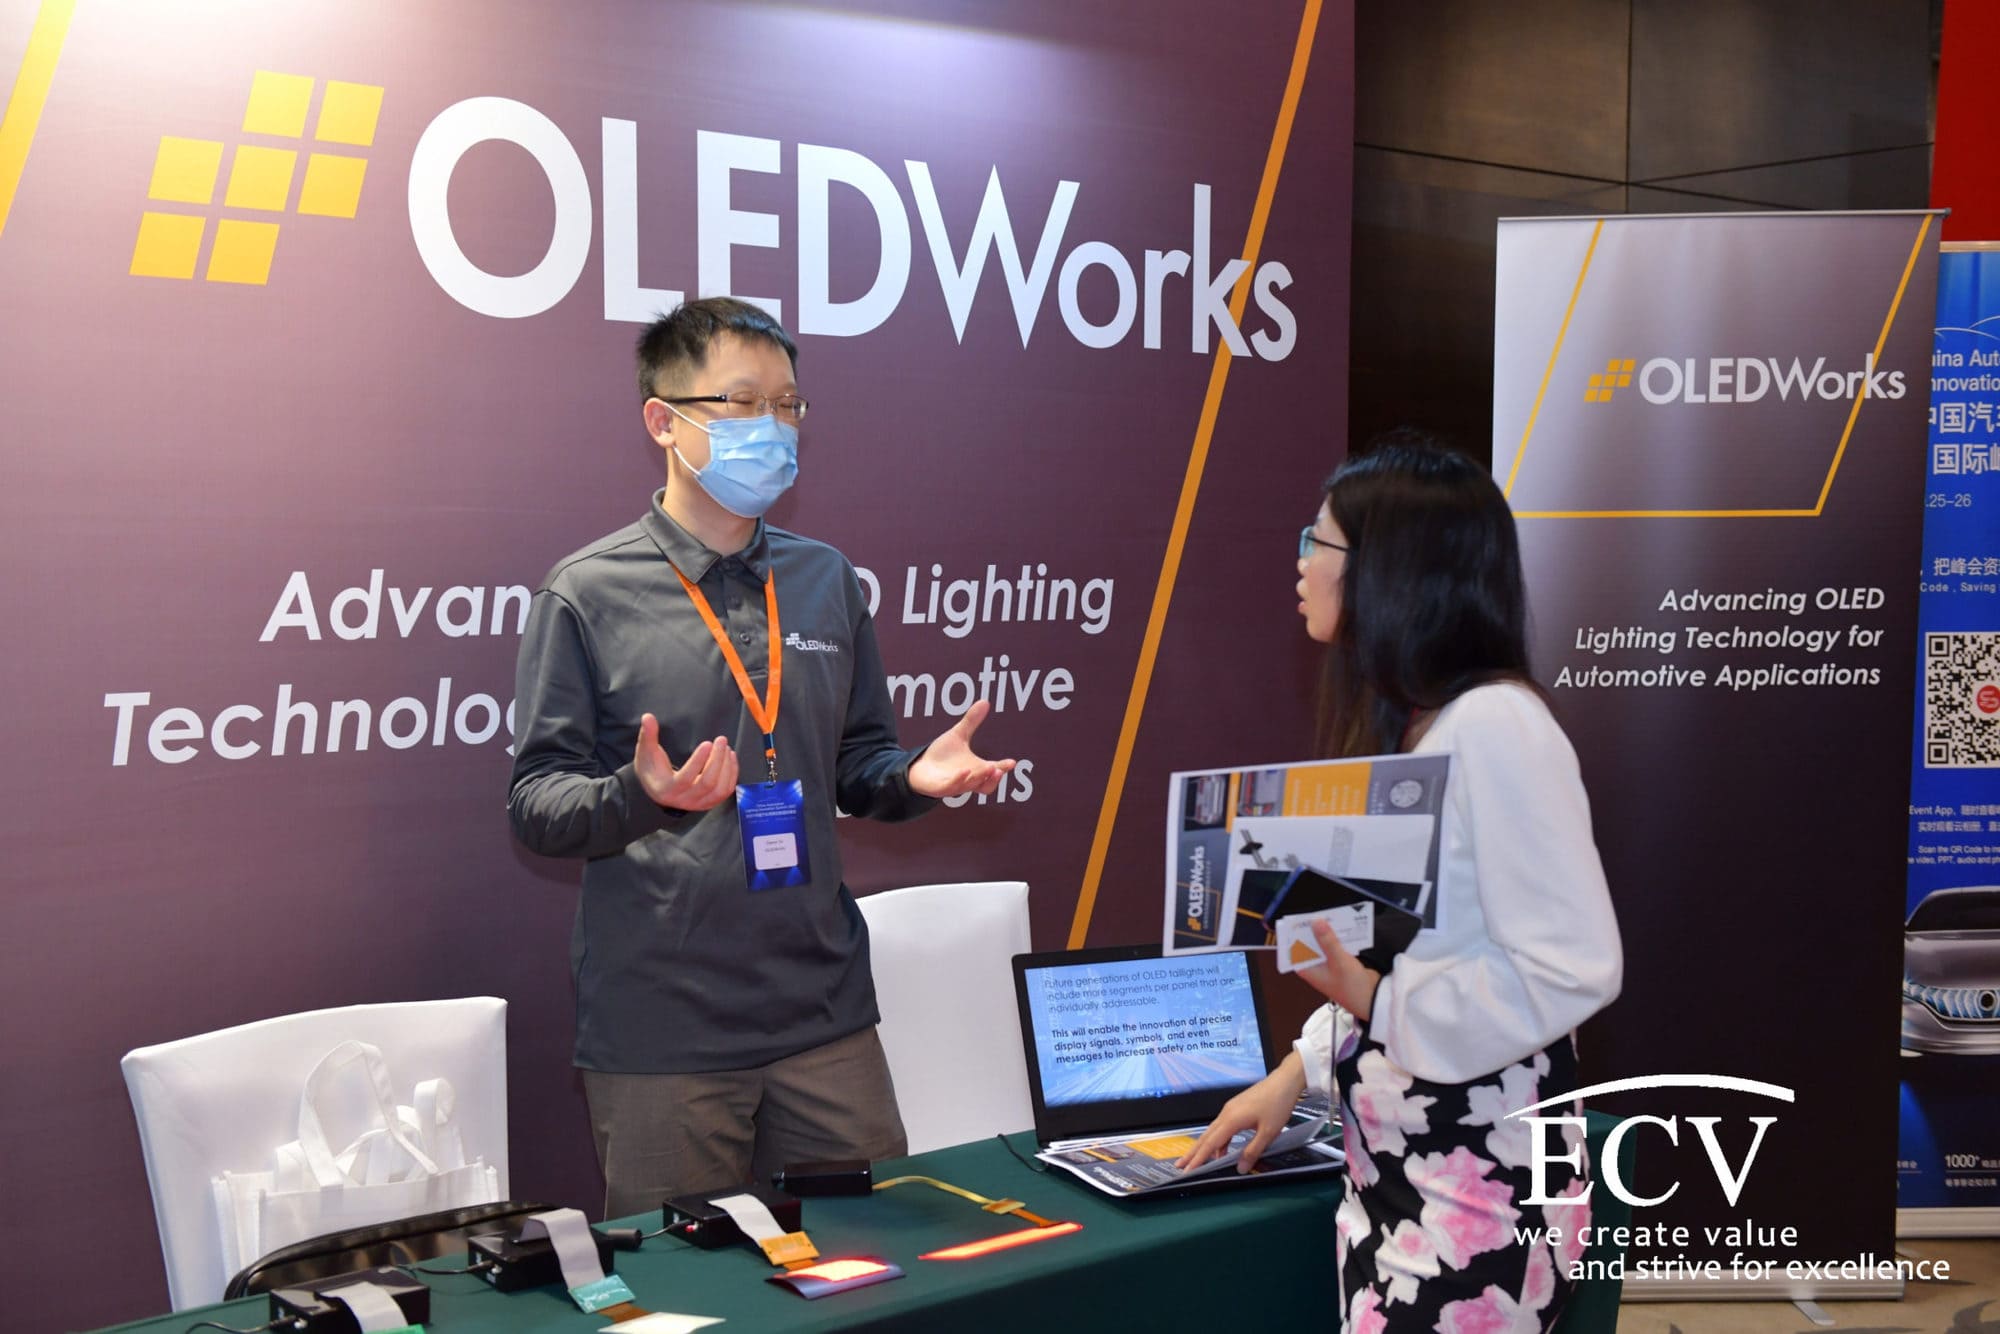 Attendees visit the OLEDWorks booth